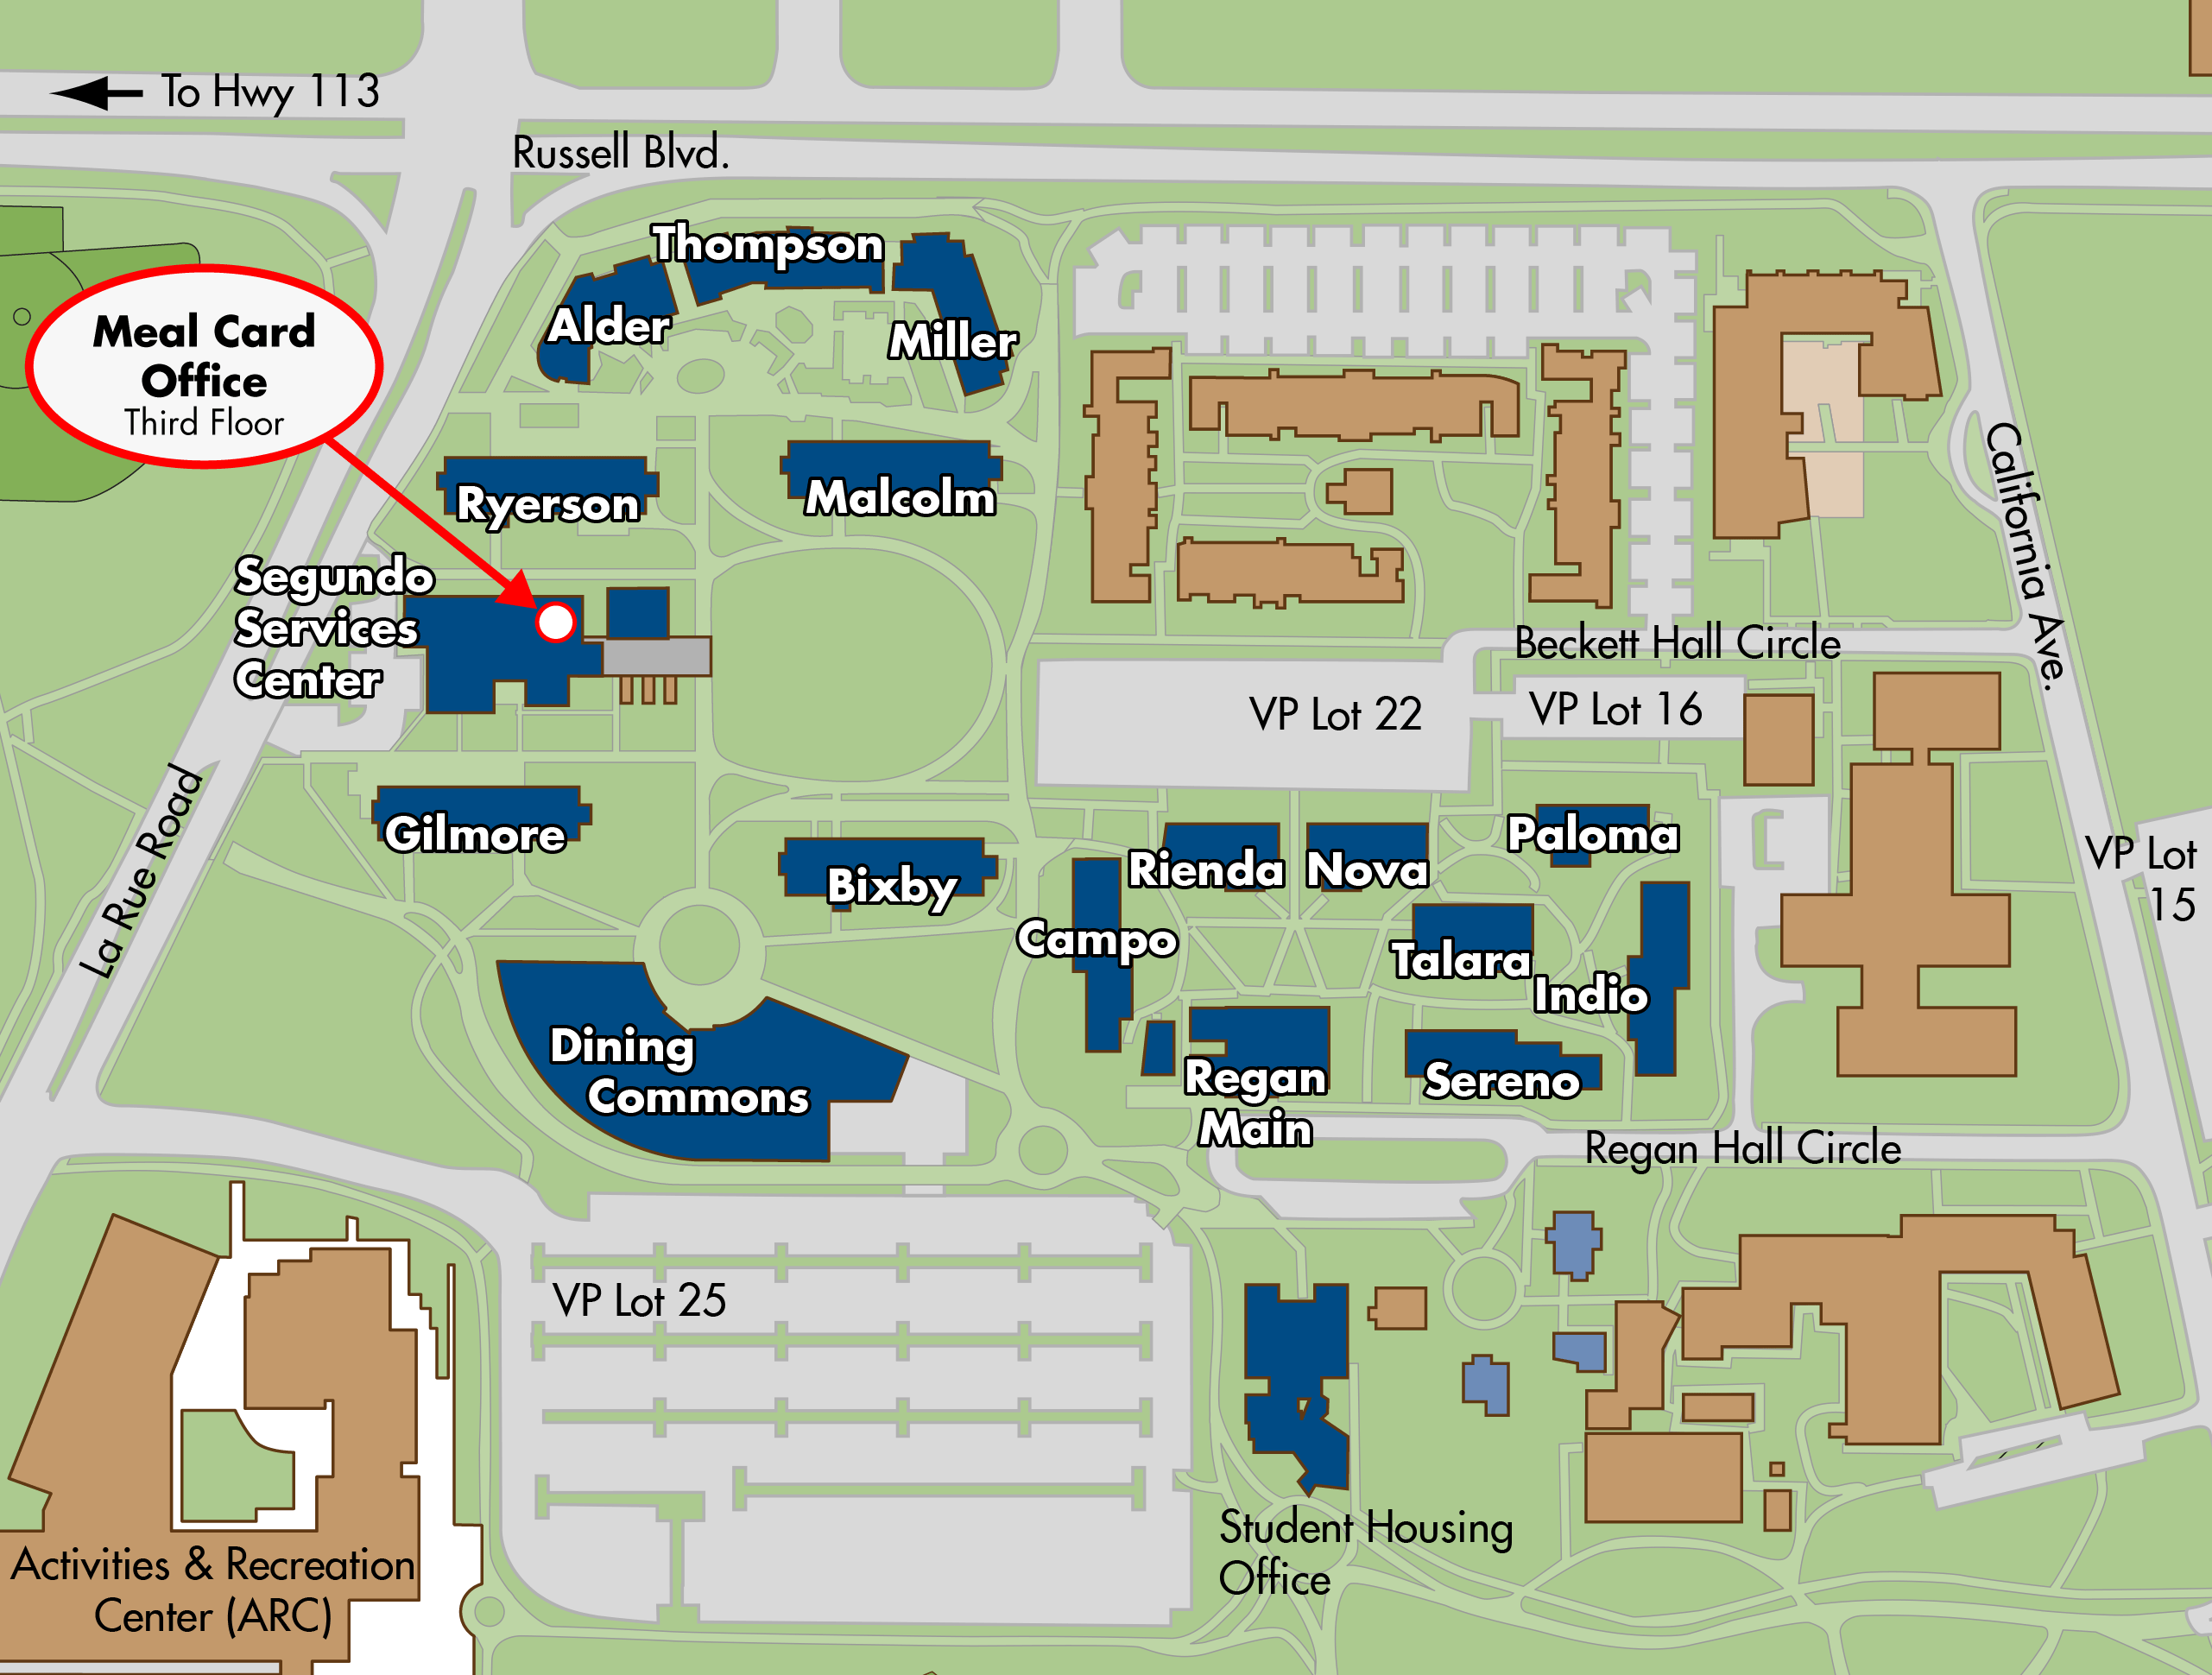 Map of the Segundo residence halls area, with the Meal Card Office highlighted in the Segundo Services Center.